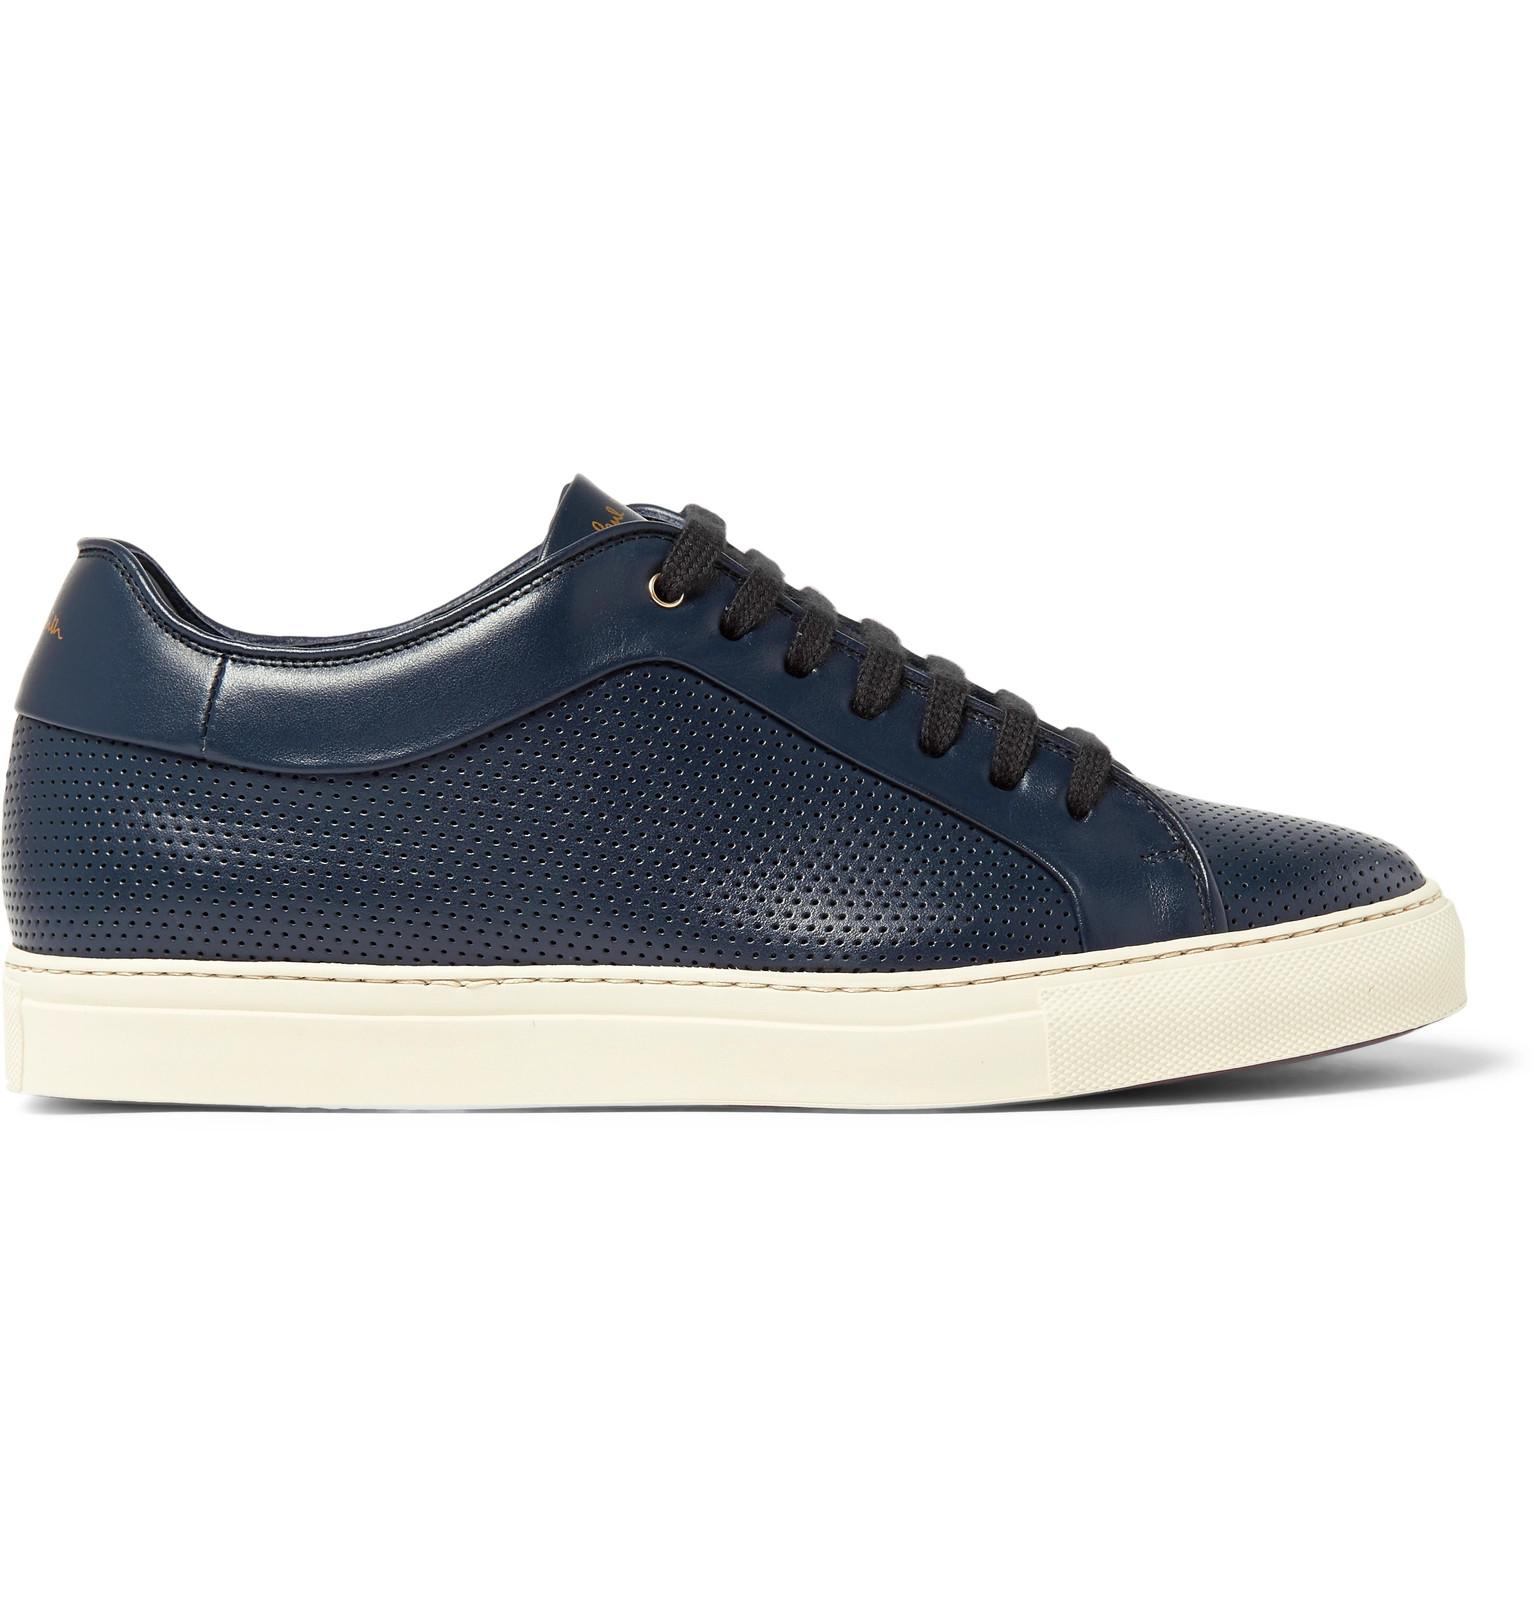 Paul Smith Basso Perforated Leather Sneakers in Navy (Blue) for Men - Lyst